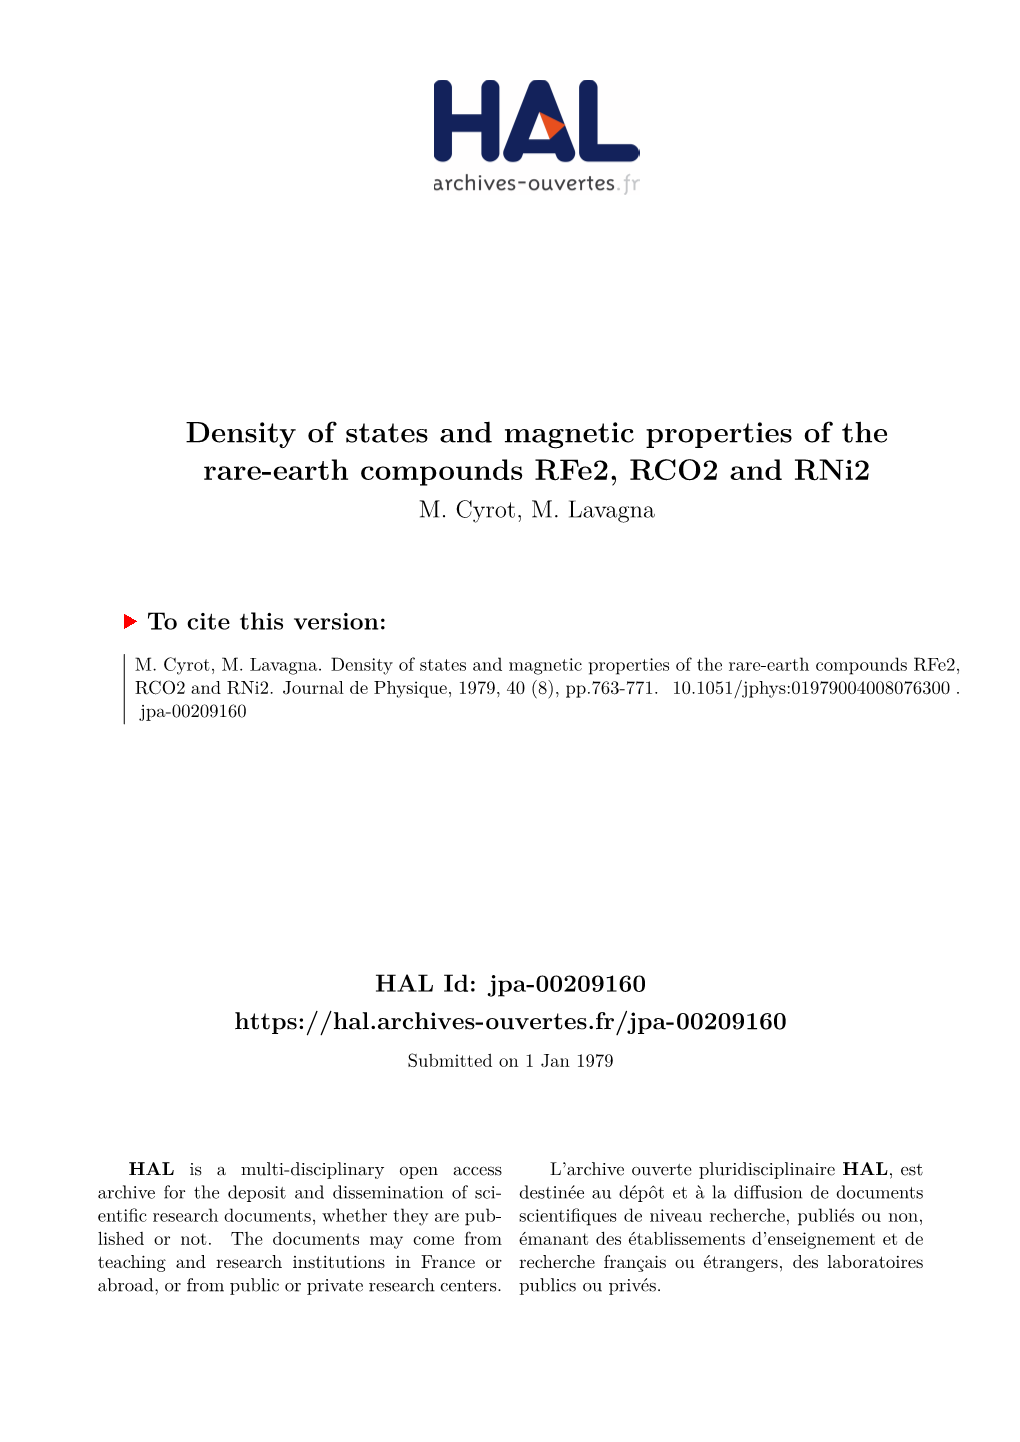 Density of States and Magnetic Properties of the Rare-Earth Compounds Rfe2, RCO2 and Rni2 M